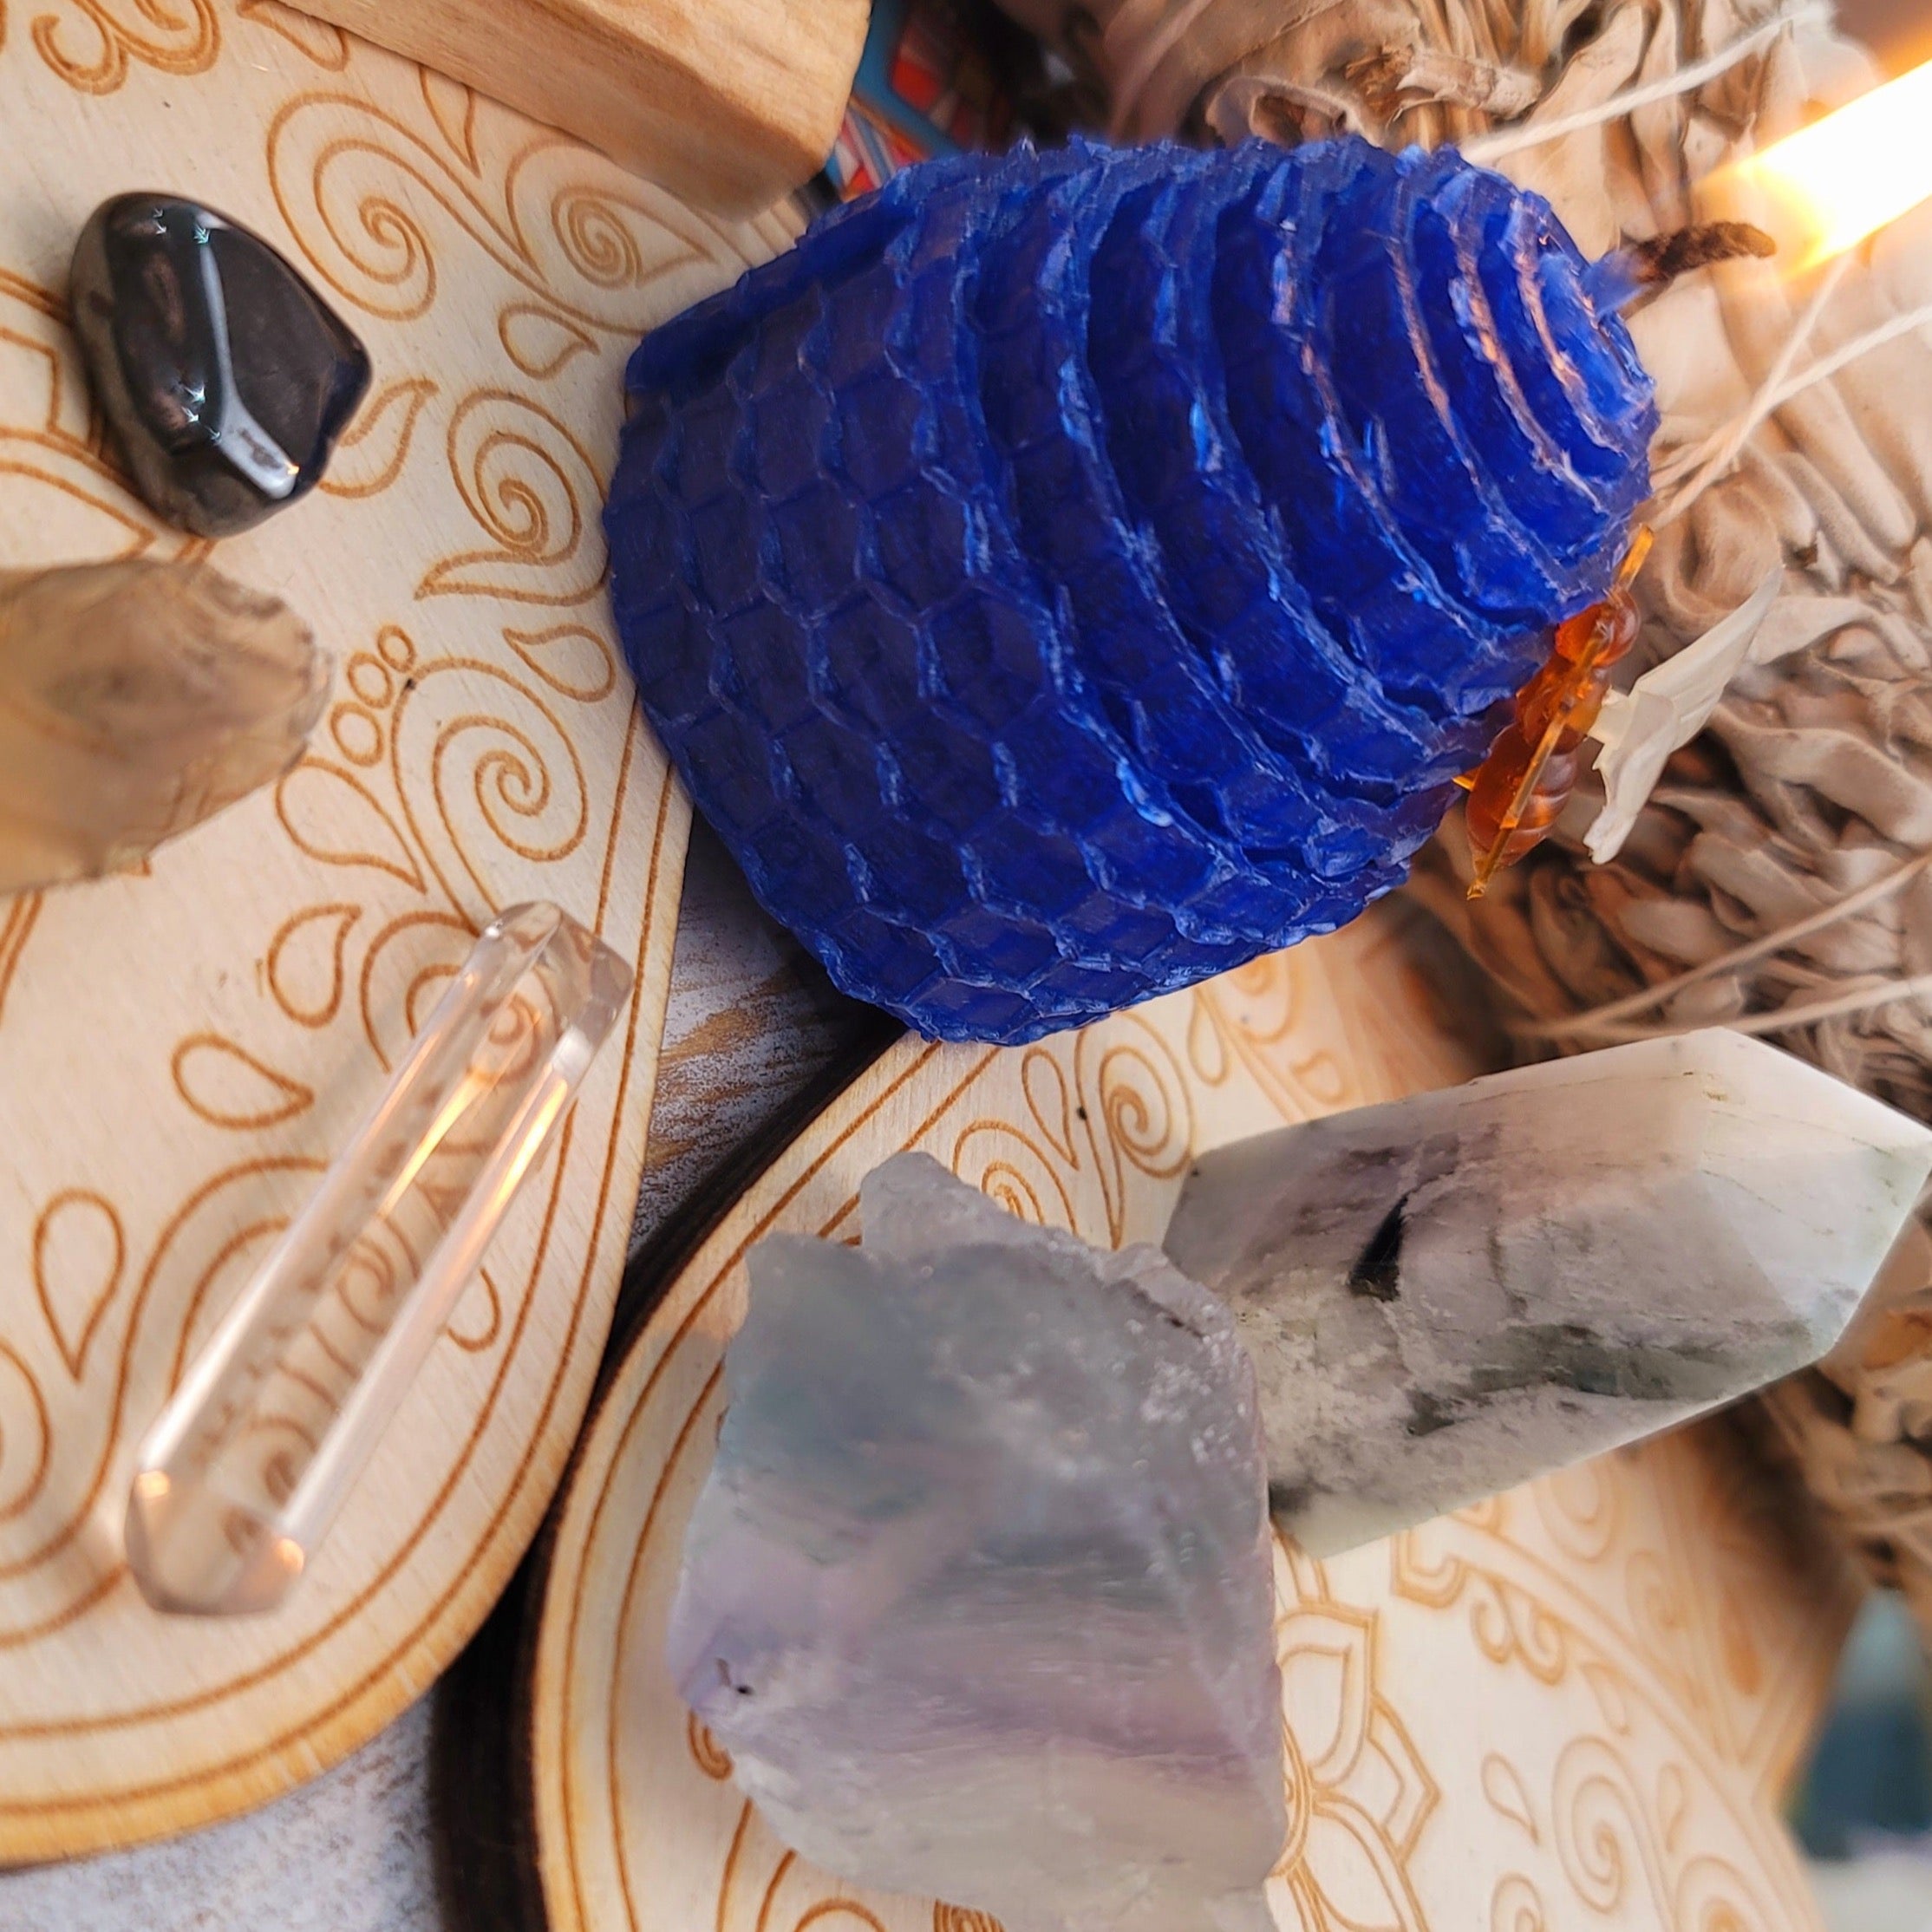 NEW MOON SET ~Embracing your Divine POWER~ , Moon Magic and New Beginnings, Protection Manifesting Weath and Abundance.